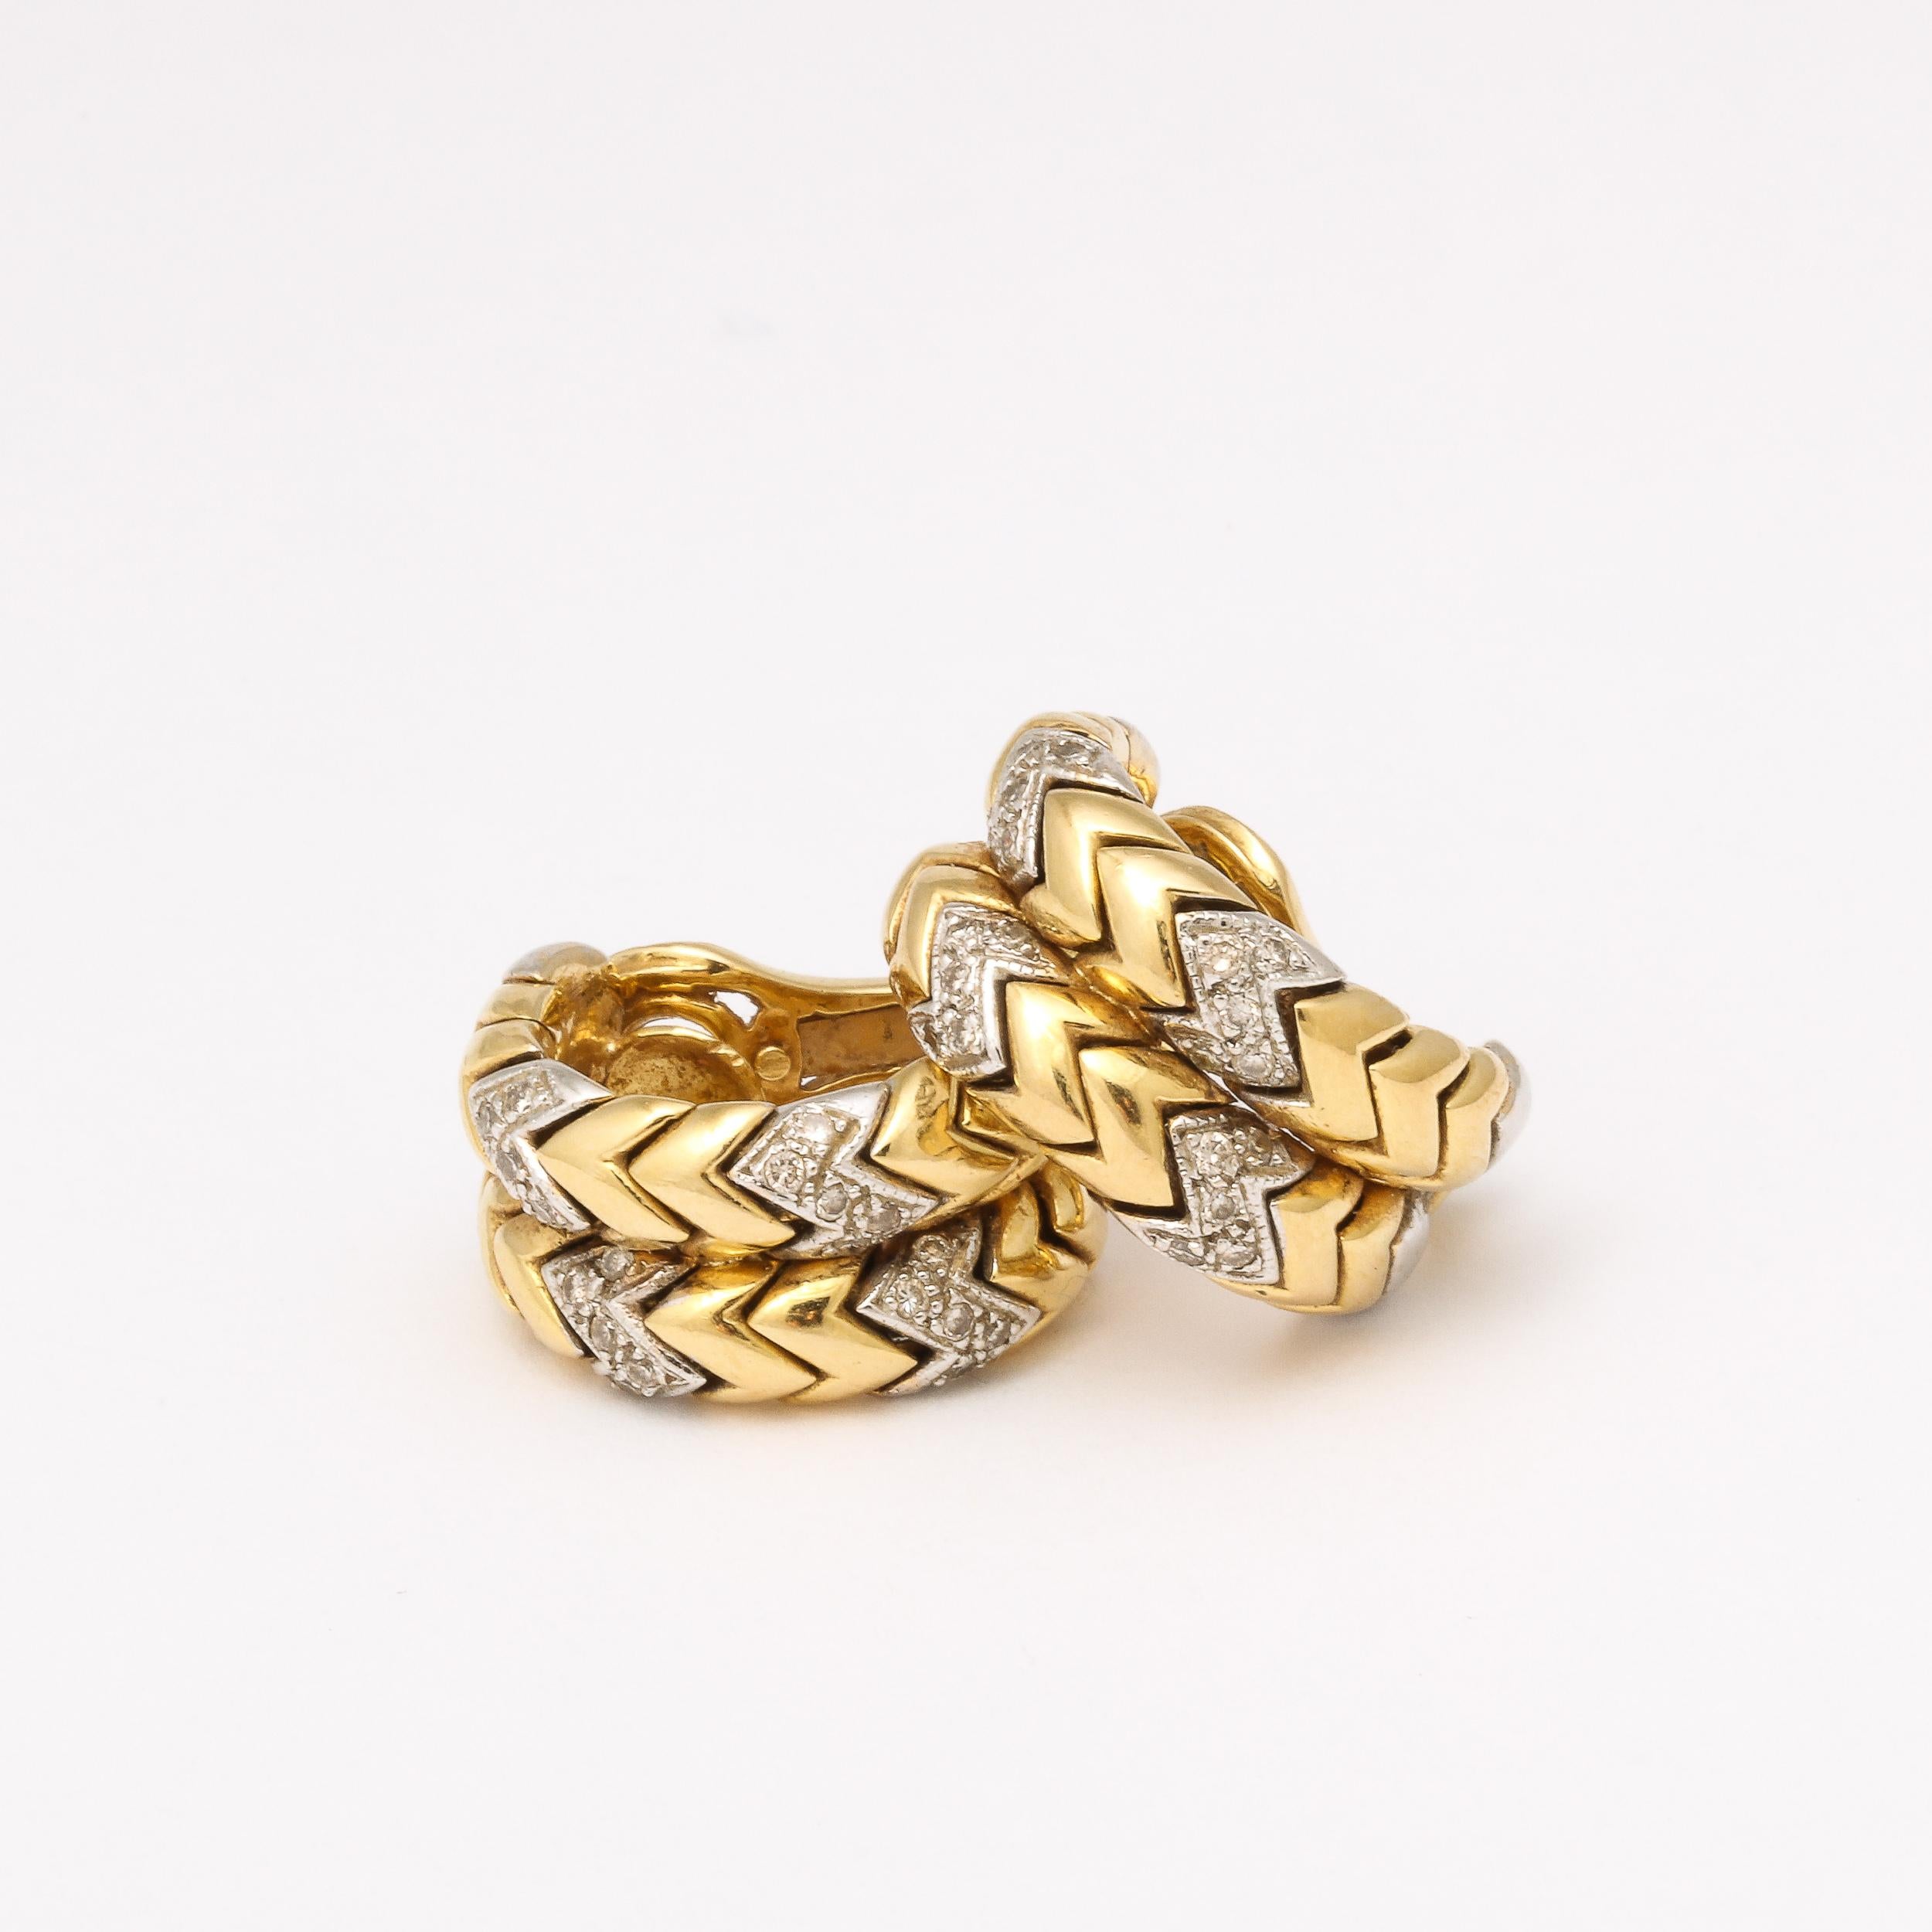 This sophisticated and elegant Pair of Earrings were crafted in the United States Circa 1970. Fashioned in repeating segments of 18 Carat Yellow and White Gold with 20 Round Cut Diamonds set into the white gold Tessellated Zig Zag motif, with a